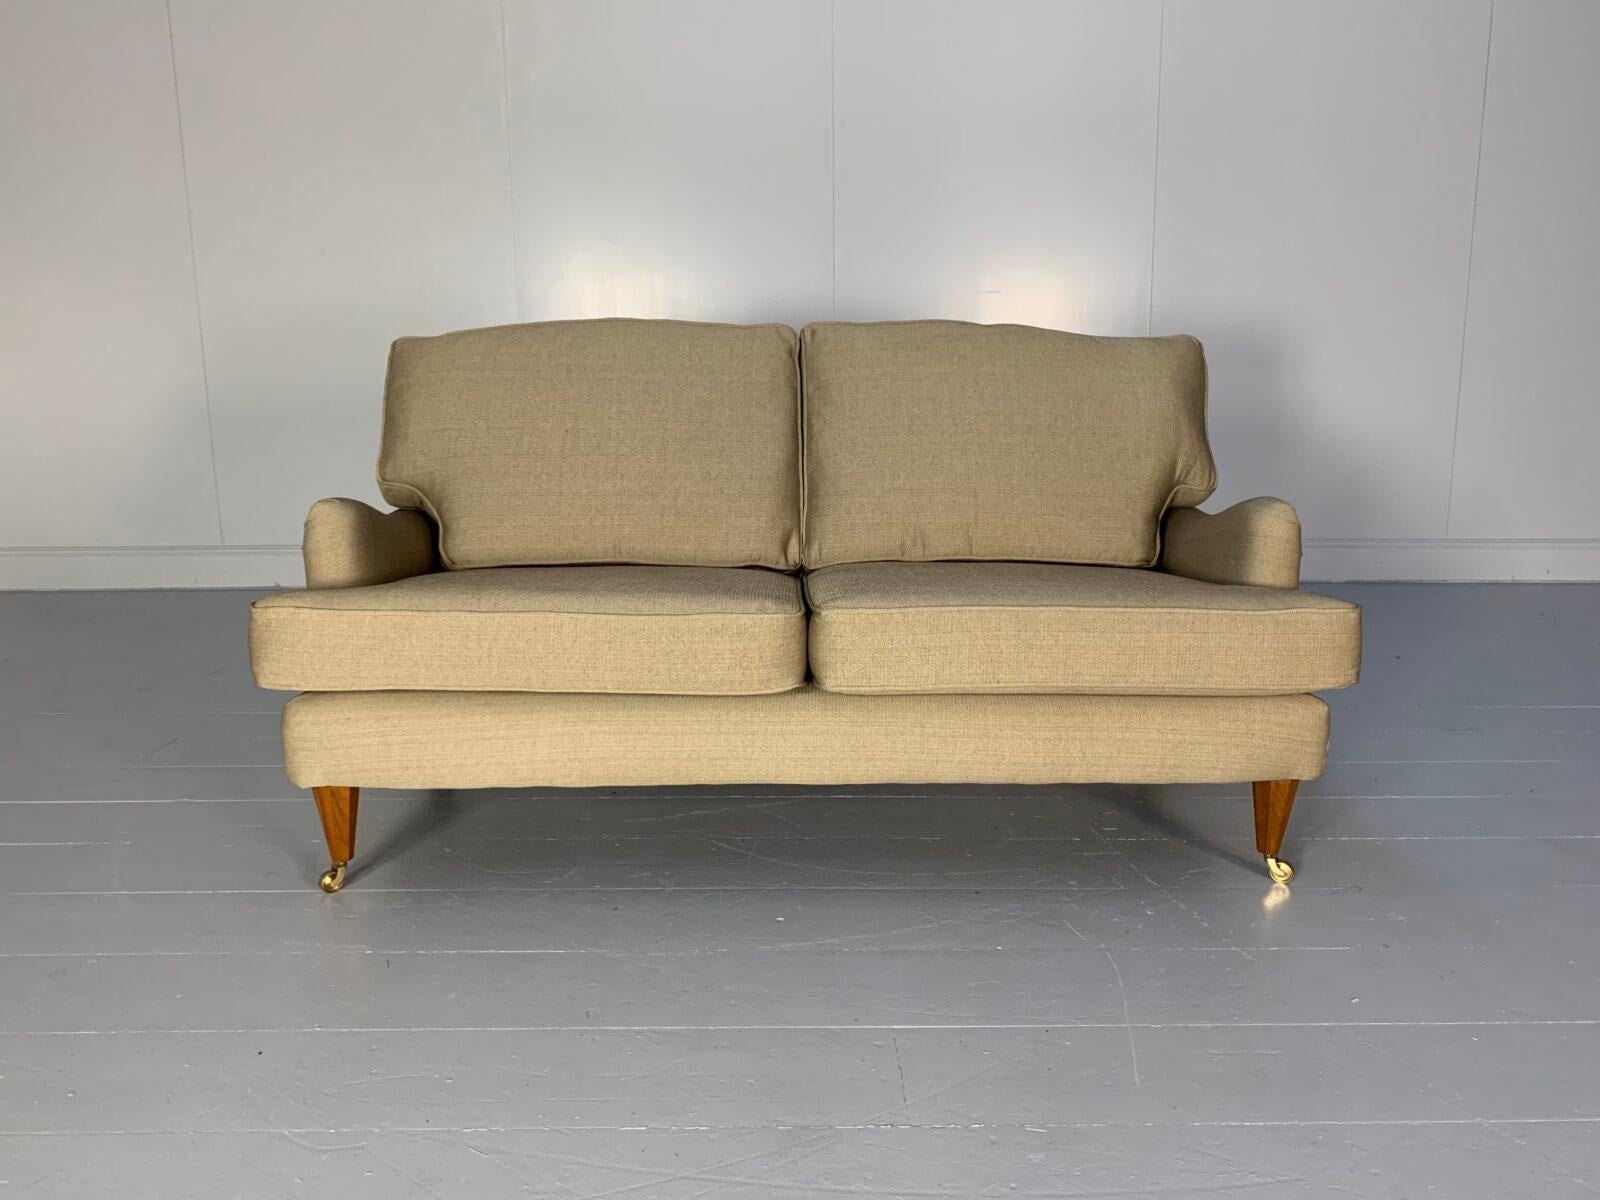 On offer on this occasion is a peerless Linley 2.5-seat Howard-design sofa, dressed in a luxurious, top-grade pale-gold woven-fabric, and with hexagonal carved-walnut front-legs with brass-castors.

As you will no doubt be aware by your interest in